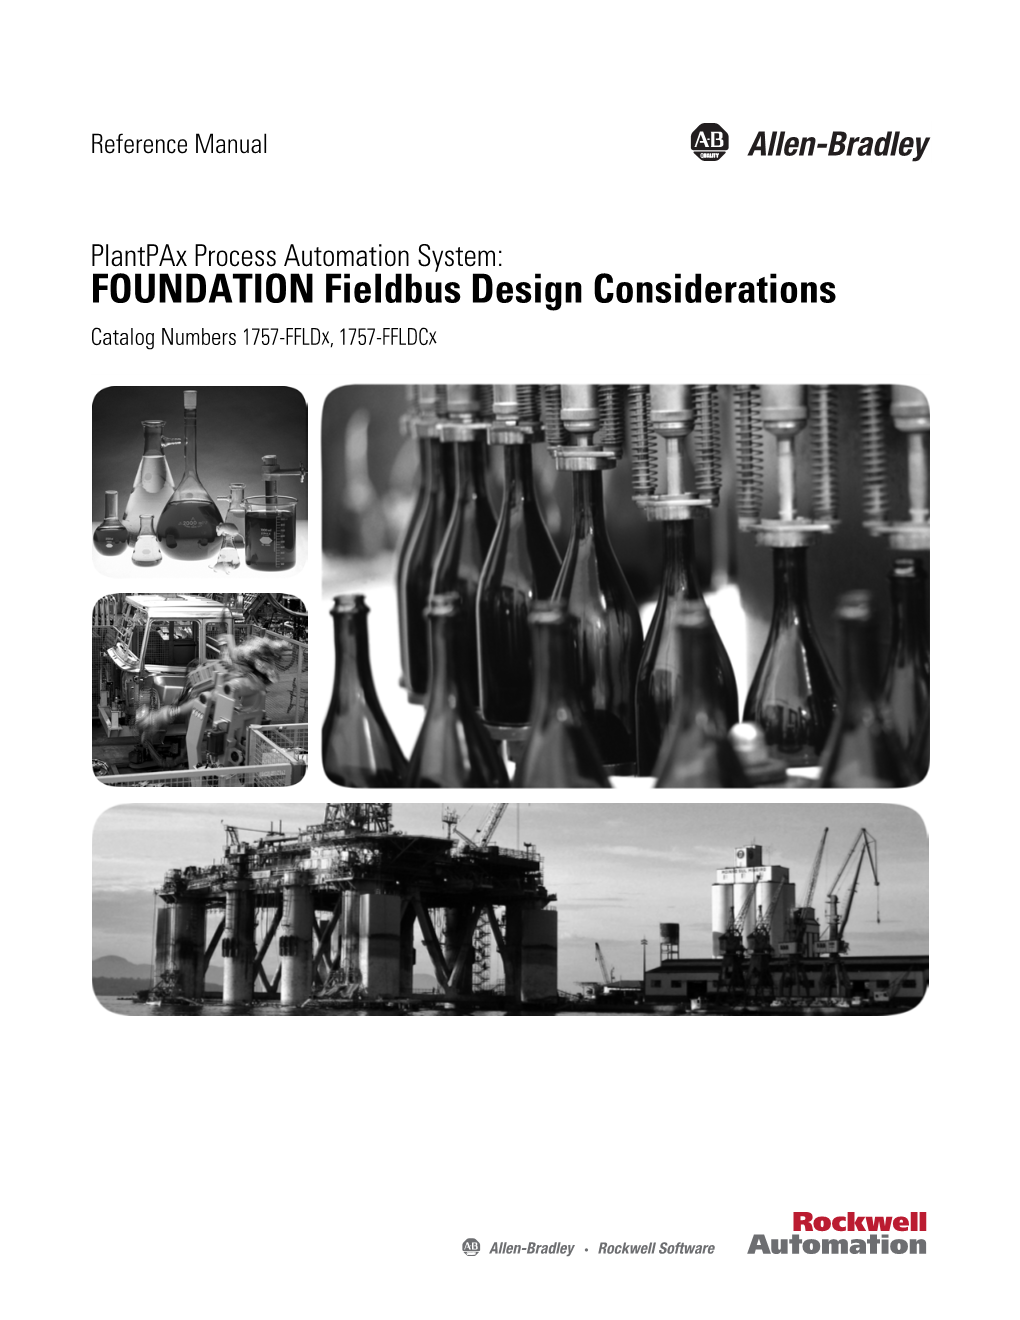 FOUNDATION Fieldbus Design Considerations Reference Manual